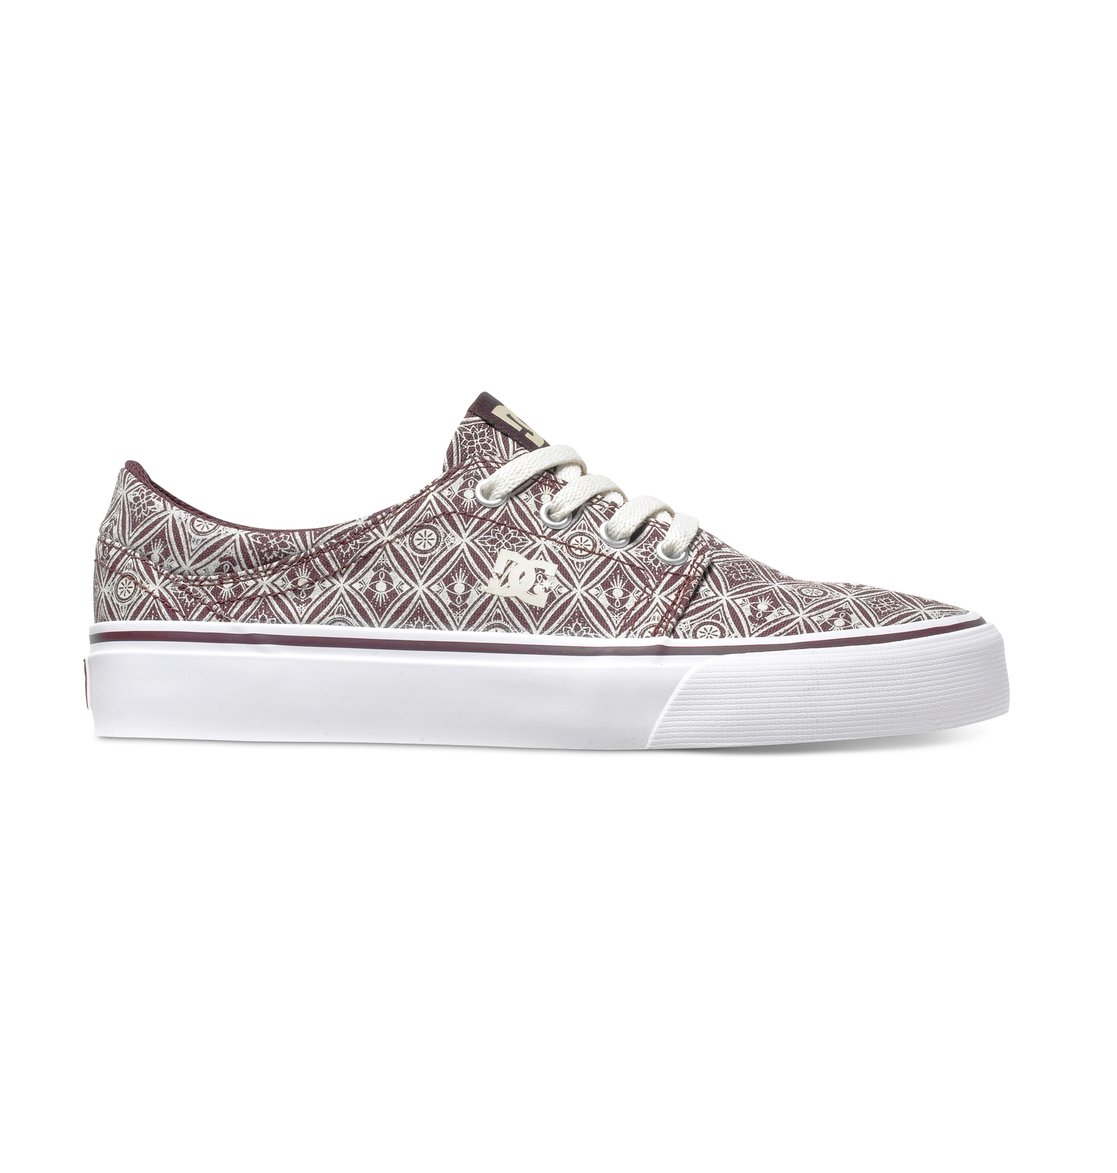 Trase SP - Dcshoes   Trase SP  DC Shoes. <br>:      ,       ,   ,         DC,  ,   ,     DC Pill Pattern. <br>: :  / :  / : .<br>